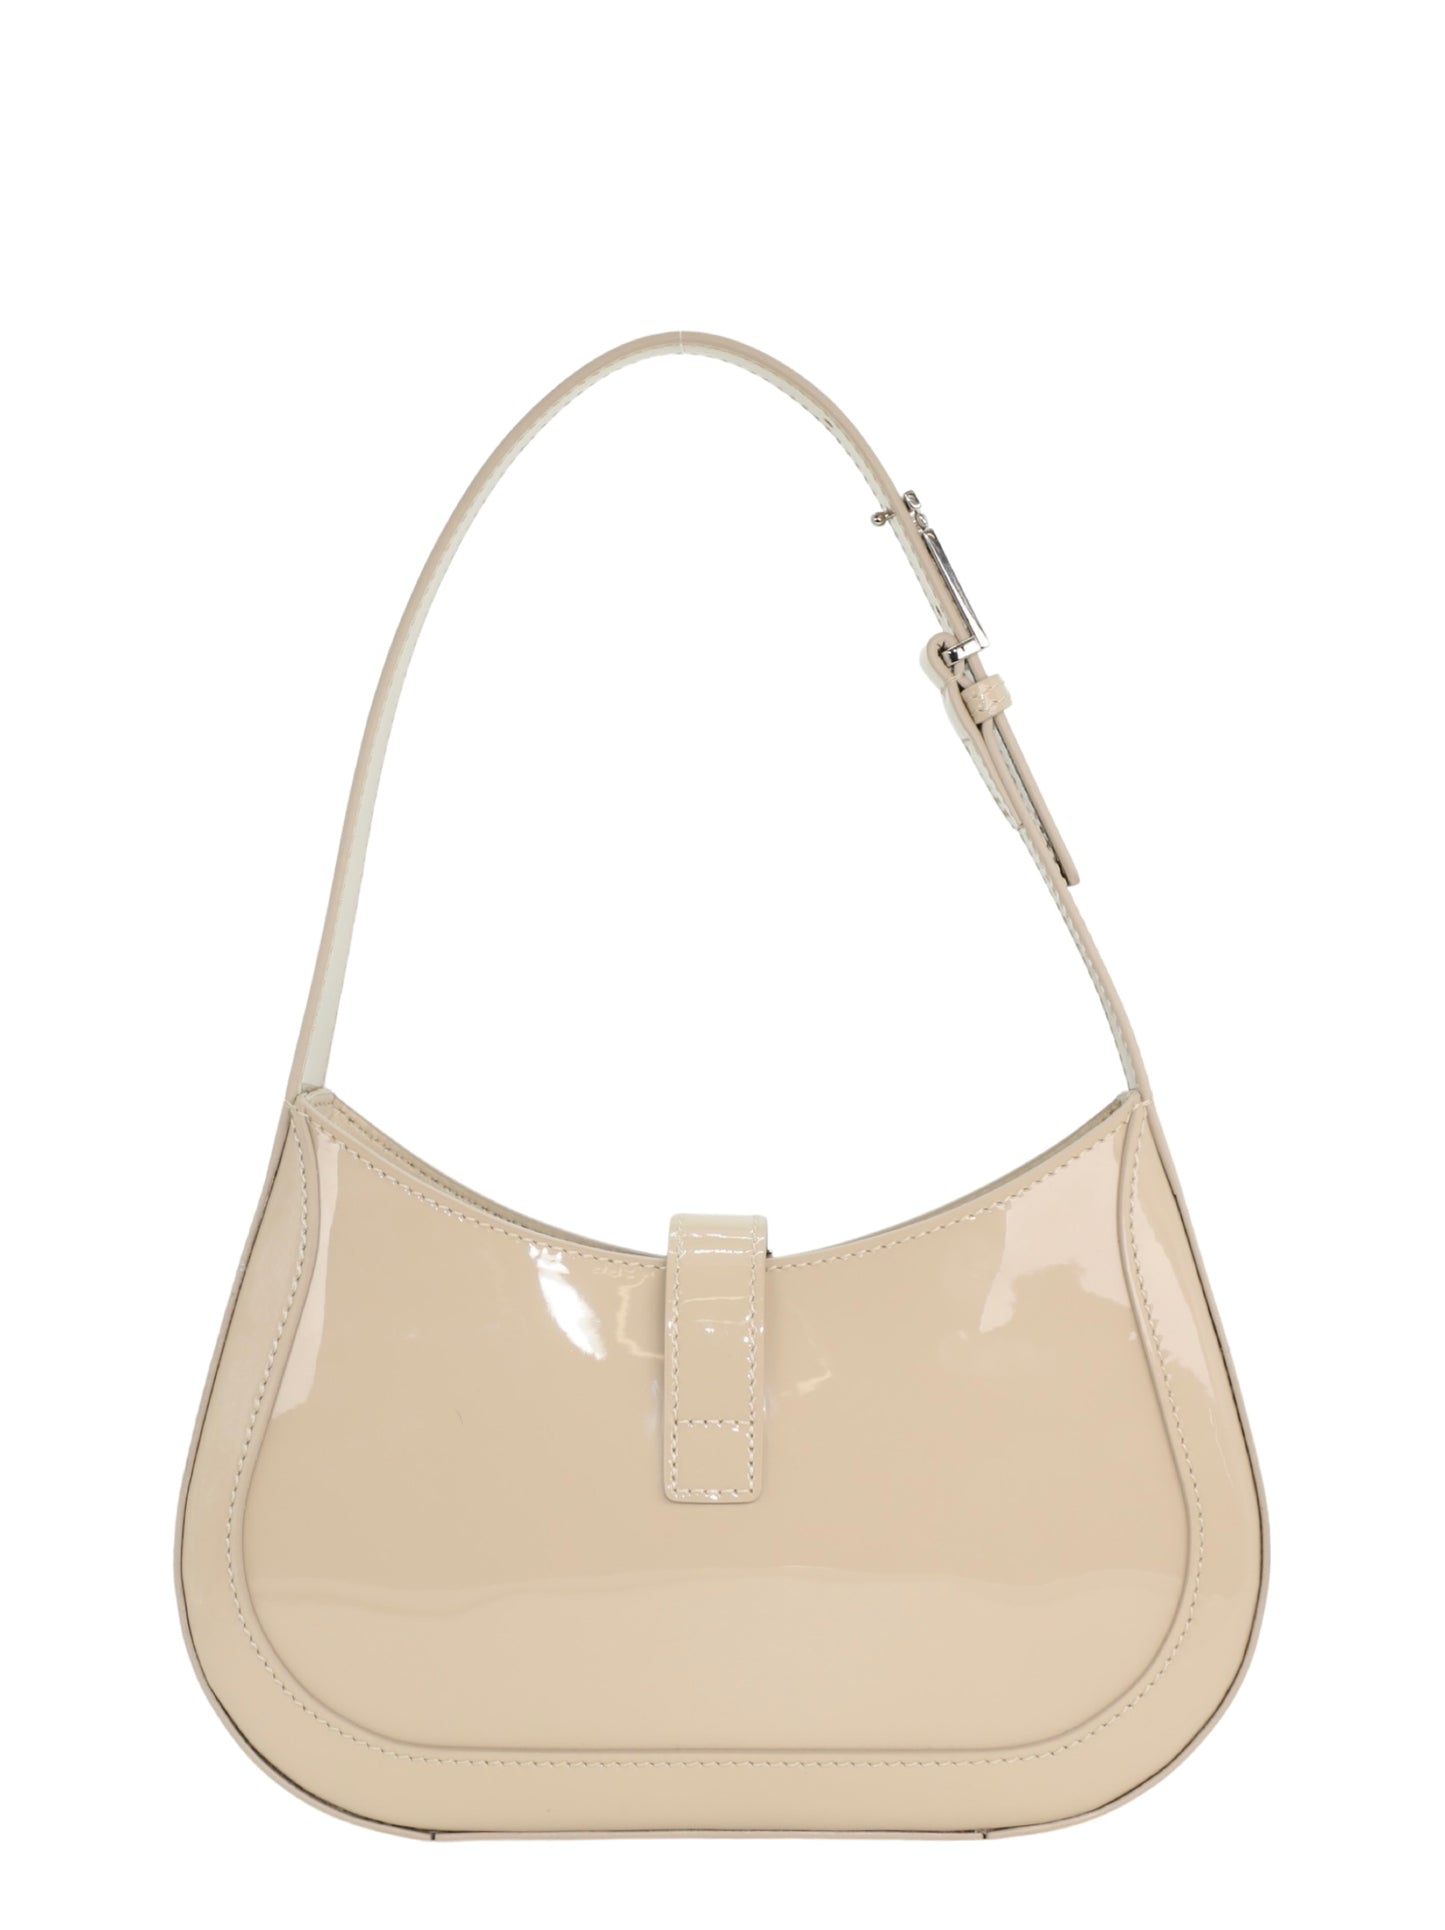 Versace Small Hobo Calf Leather Shoulder Bag in Light Sand